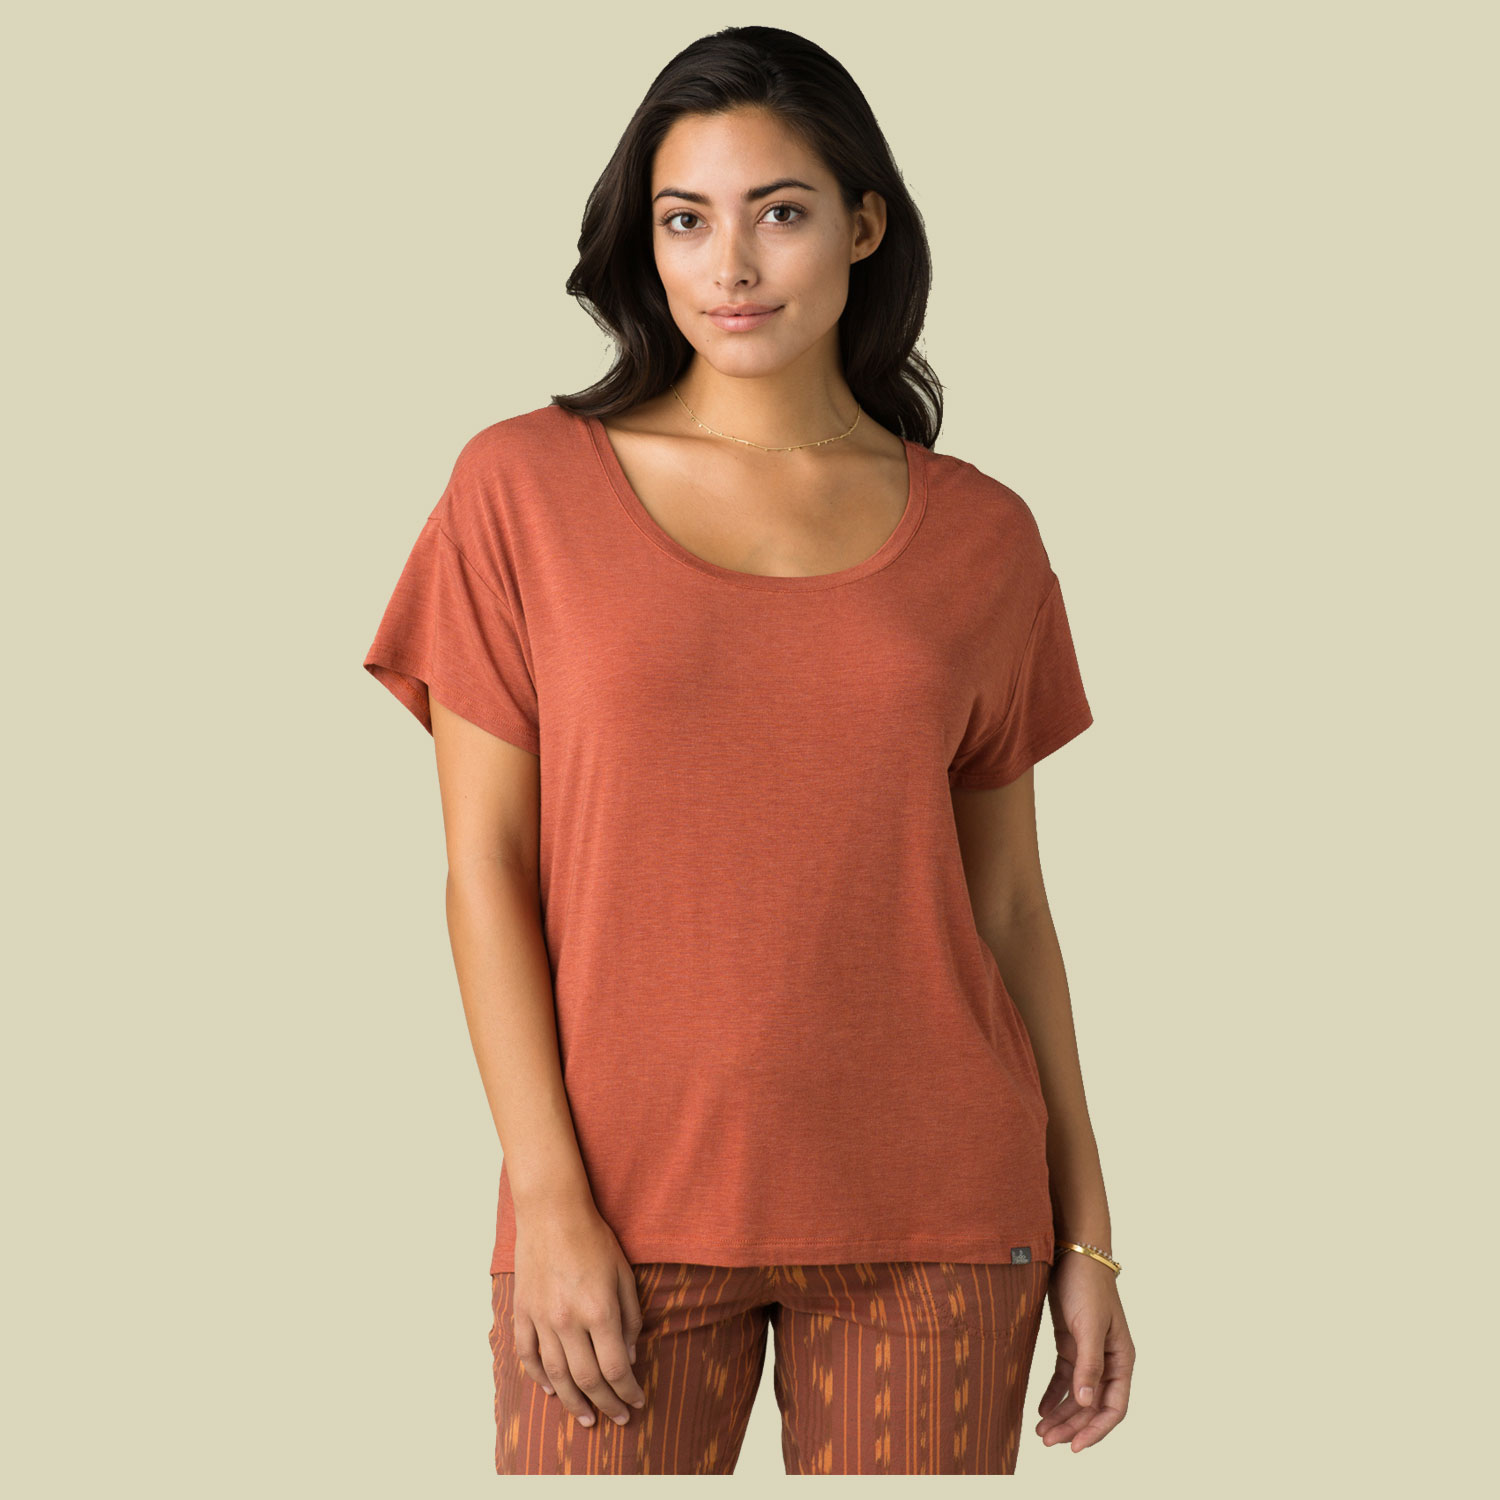 Foundation Slouch Top Women